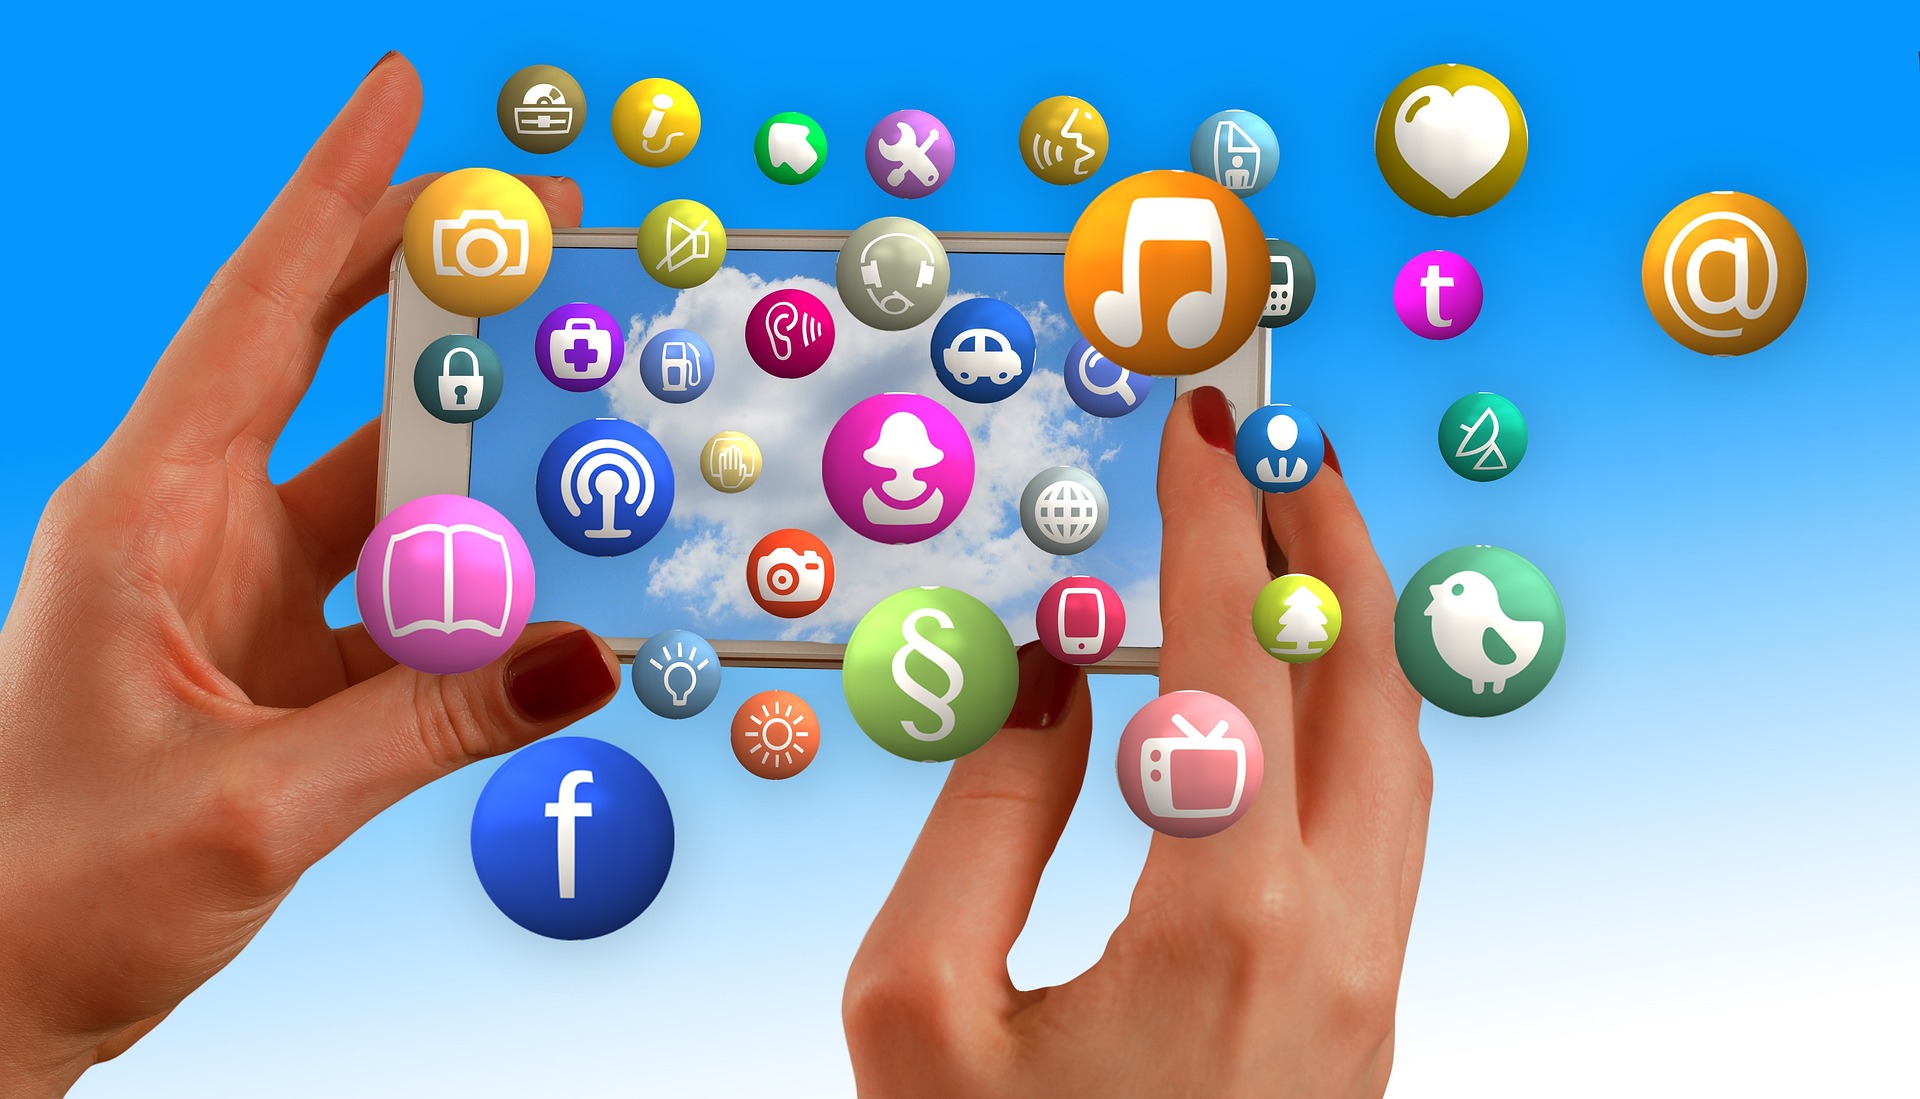 Abstract image of lady's hands holding smartphone with social media icons flying out the screen.